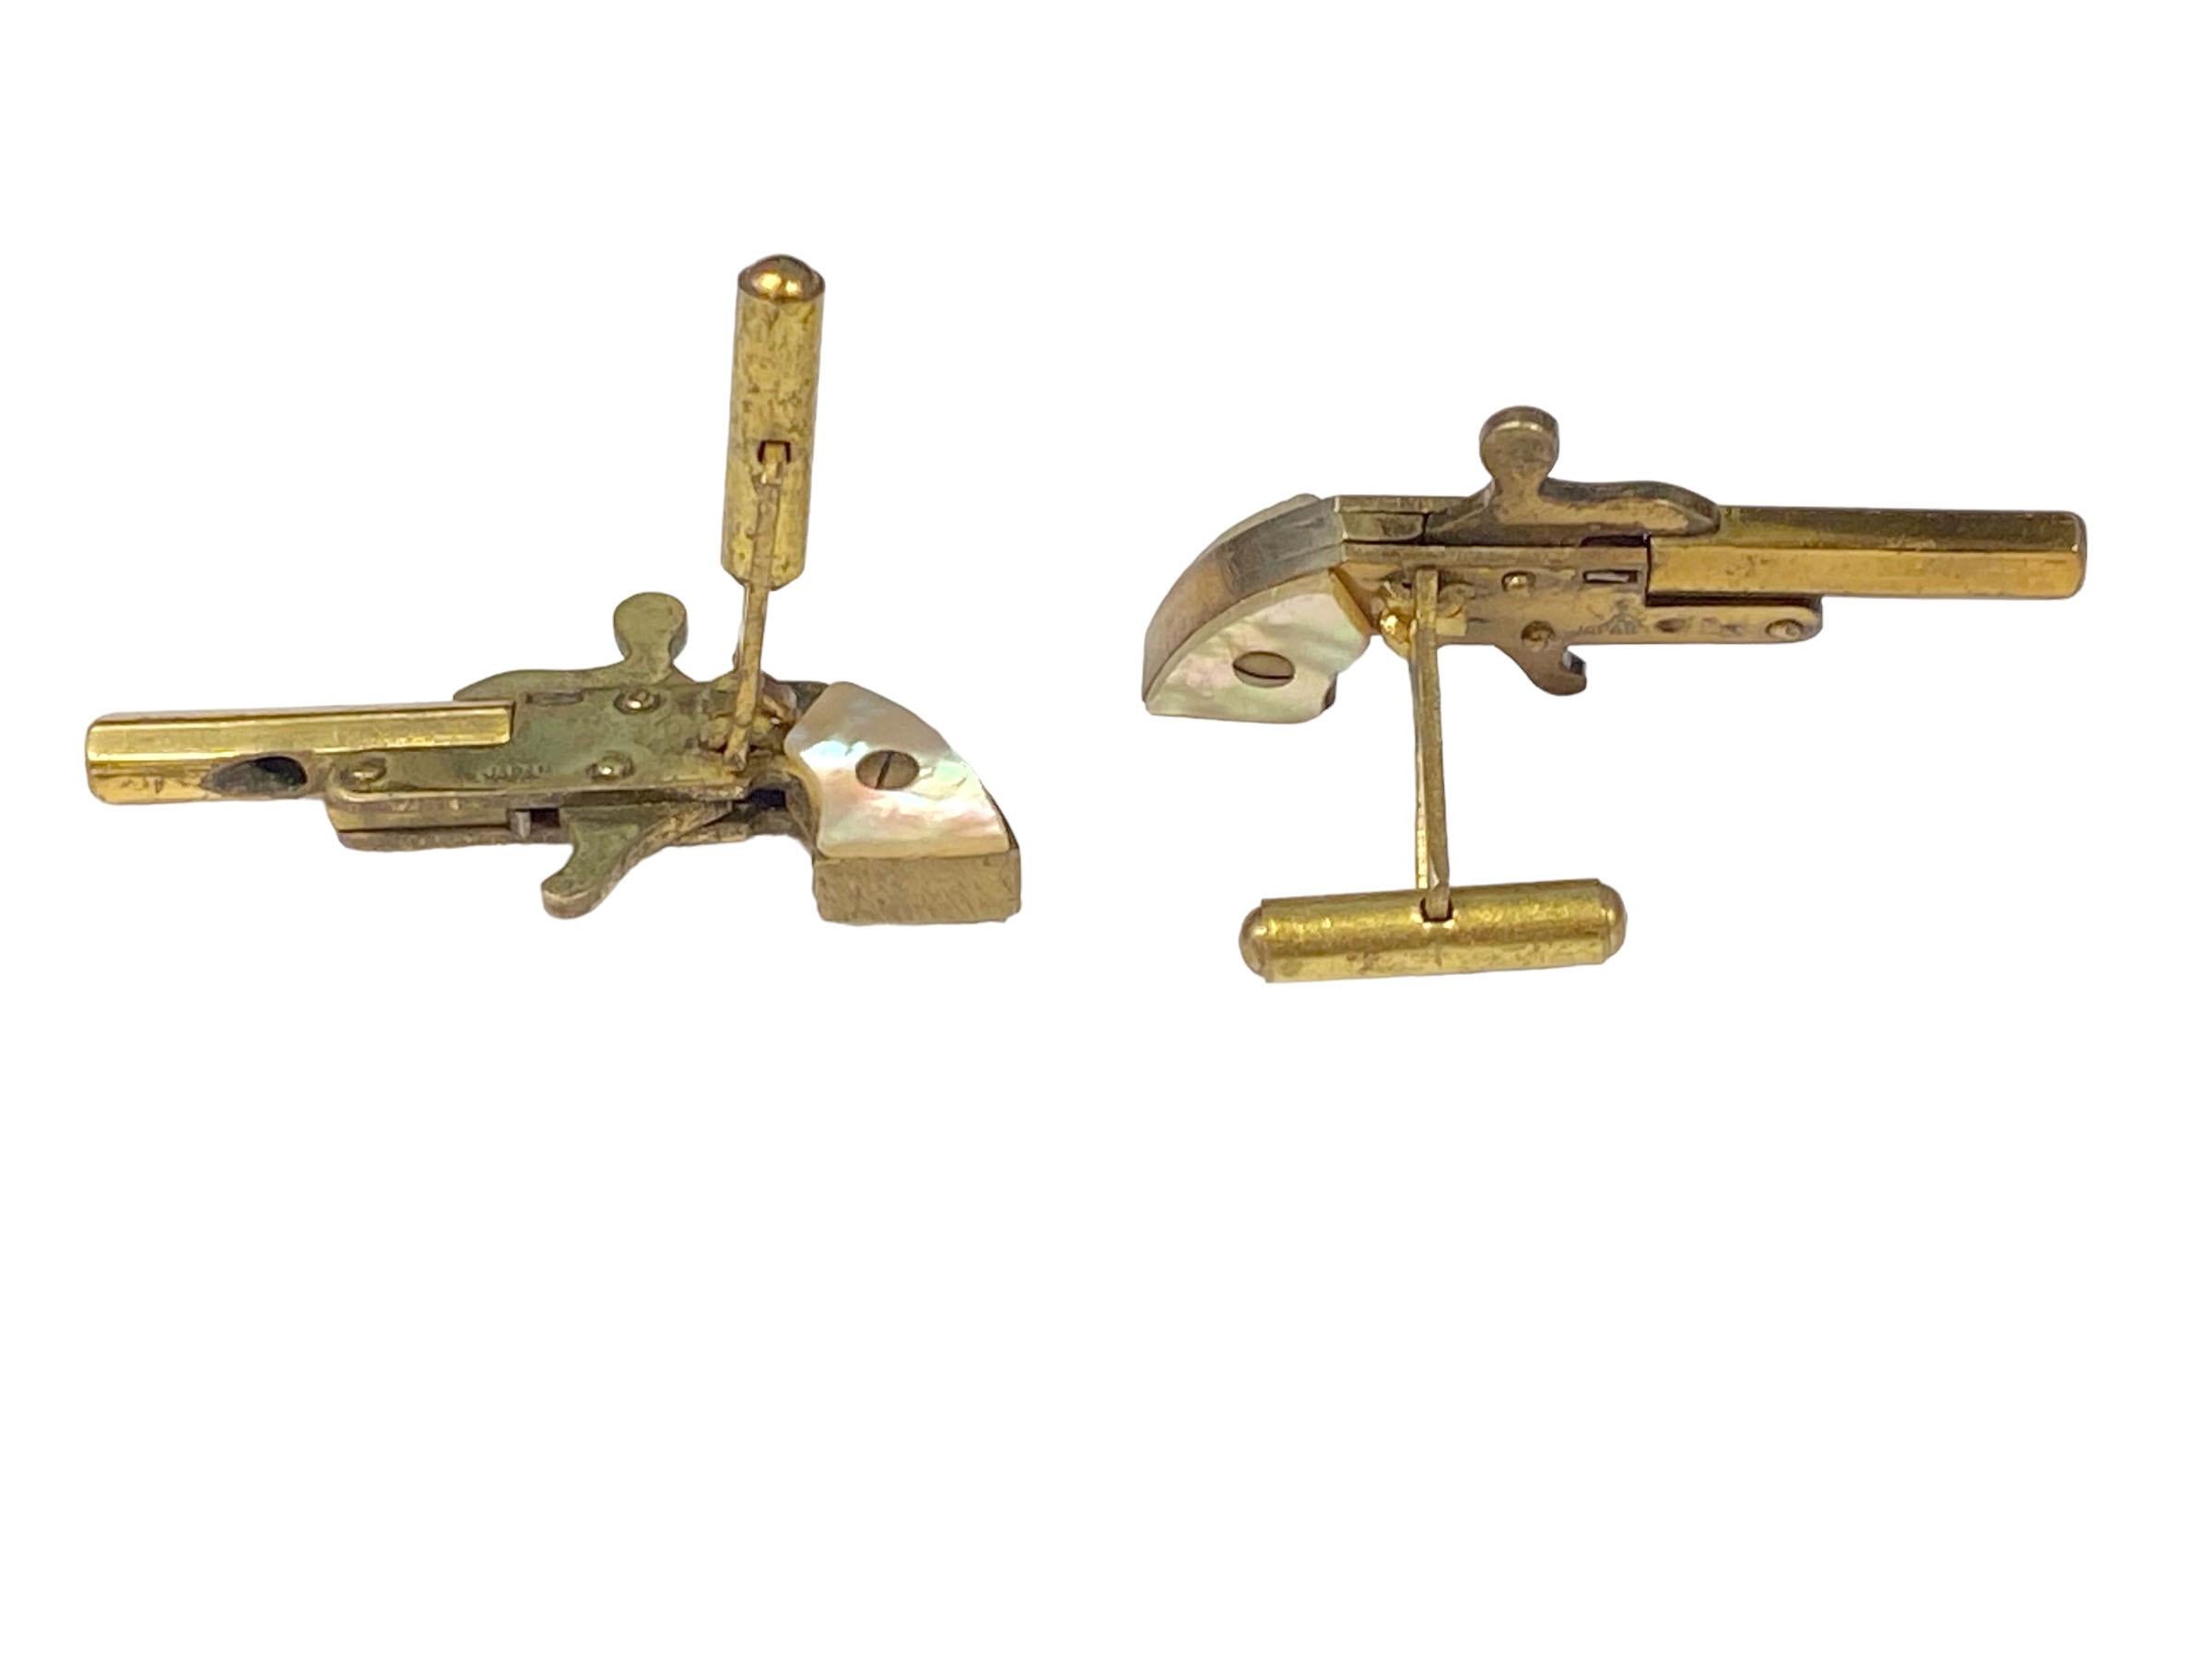 Circa 1960s Cap Pistol Cuff-links, measuring 1 3/4 inches in length, Brass with Mother of Pearl Handles, these are very detailed and are working miniature guns that shoot blank caps.  